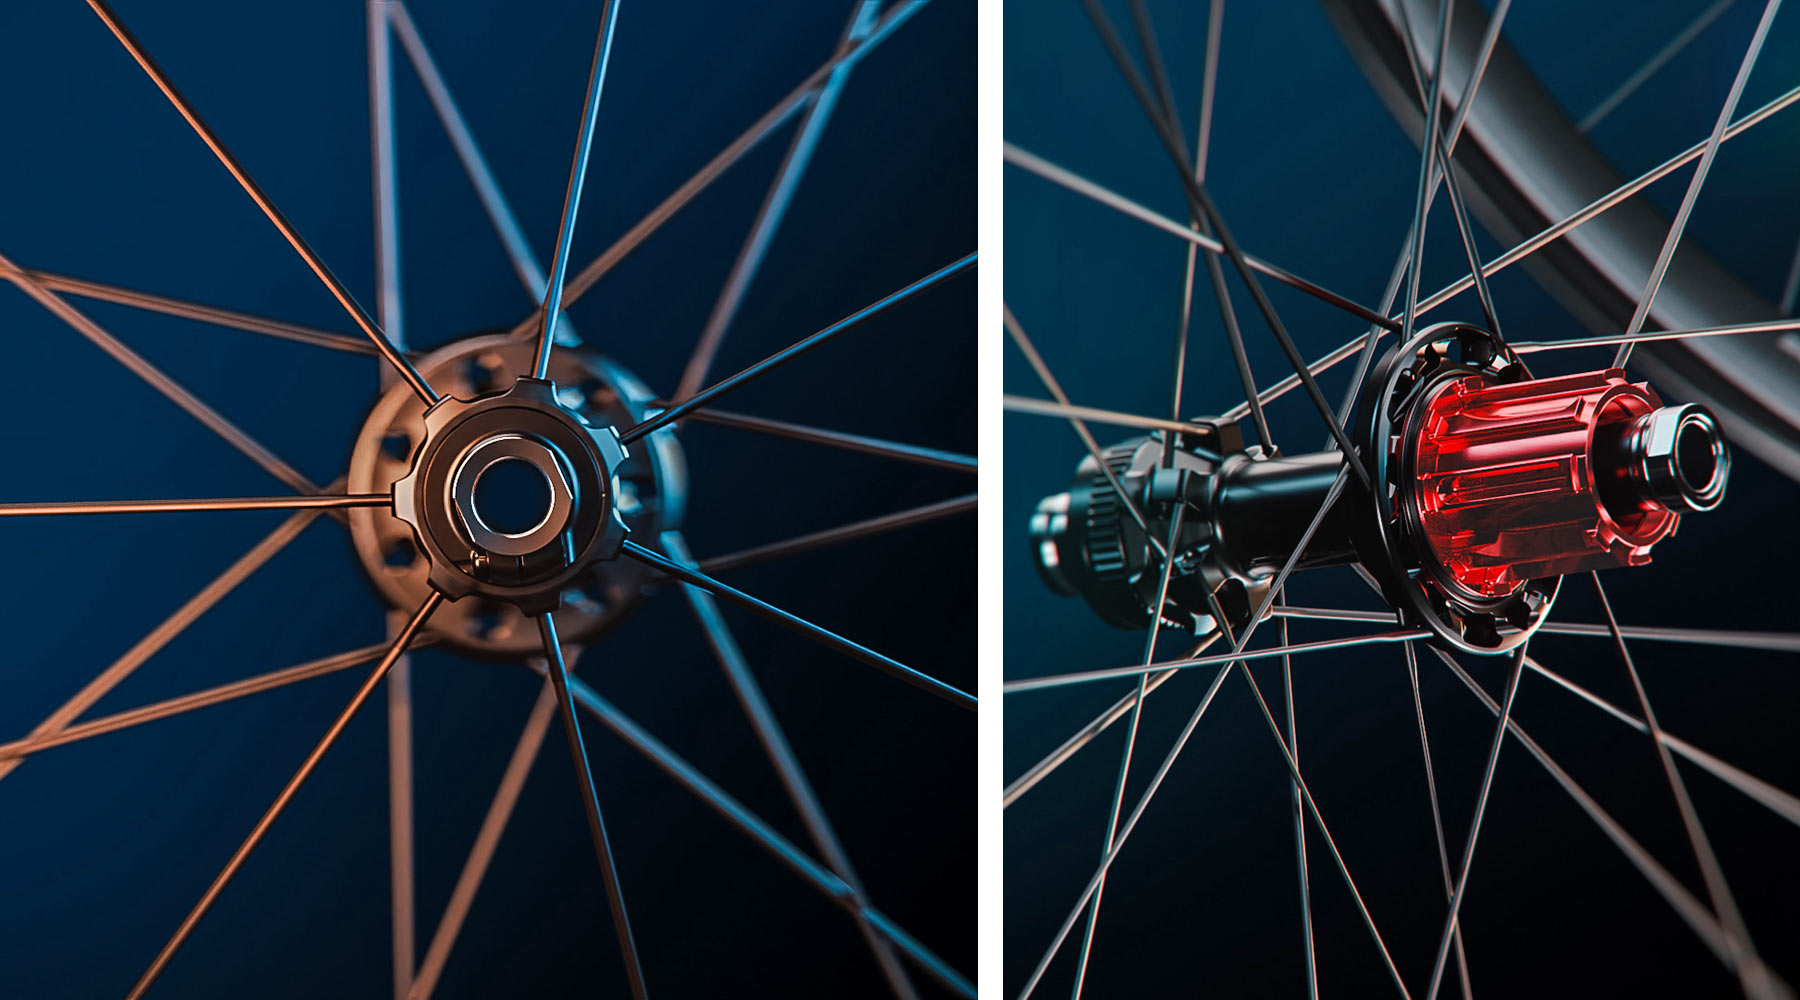 Campagnolo Carbon Wheels Go UltraLight with 1160-1240g Hyperon 